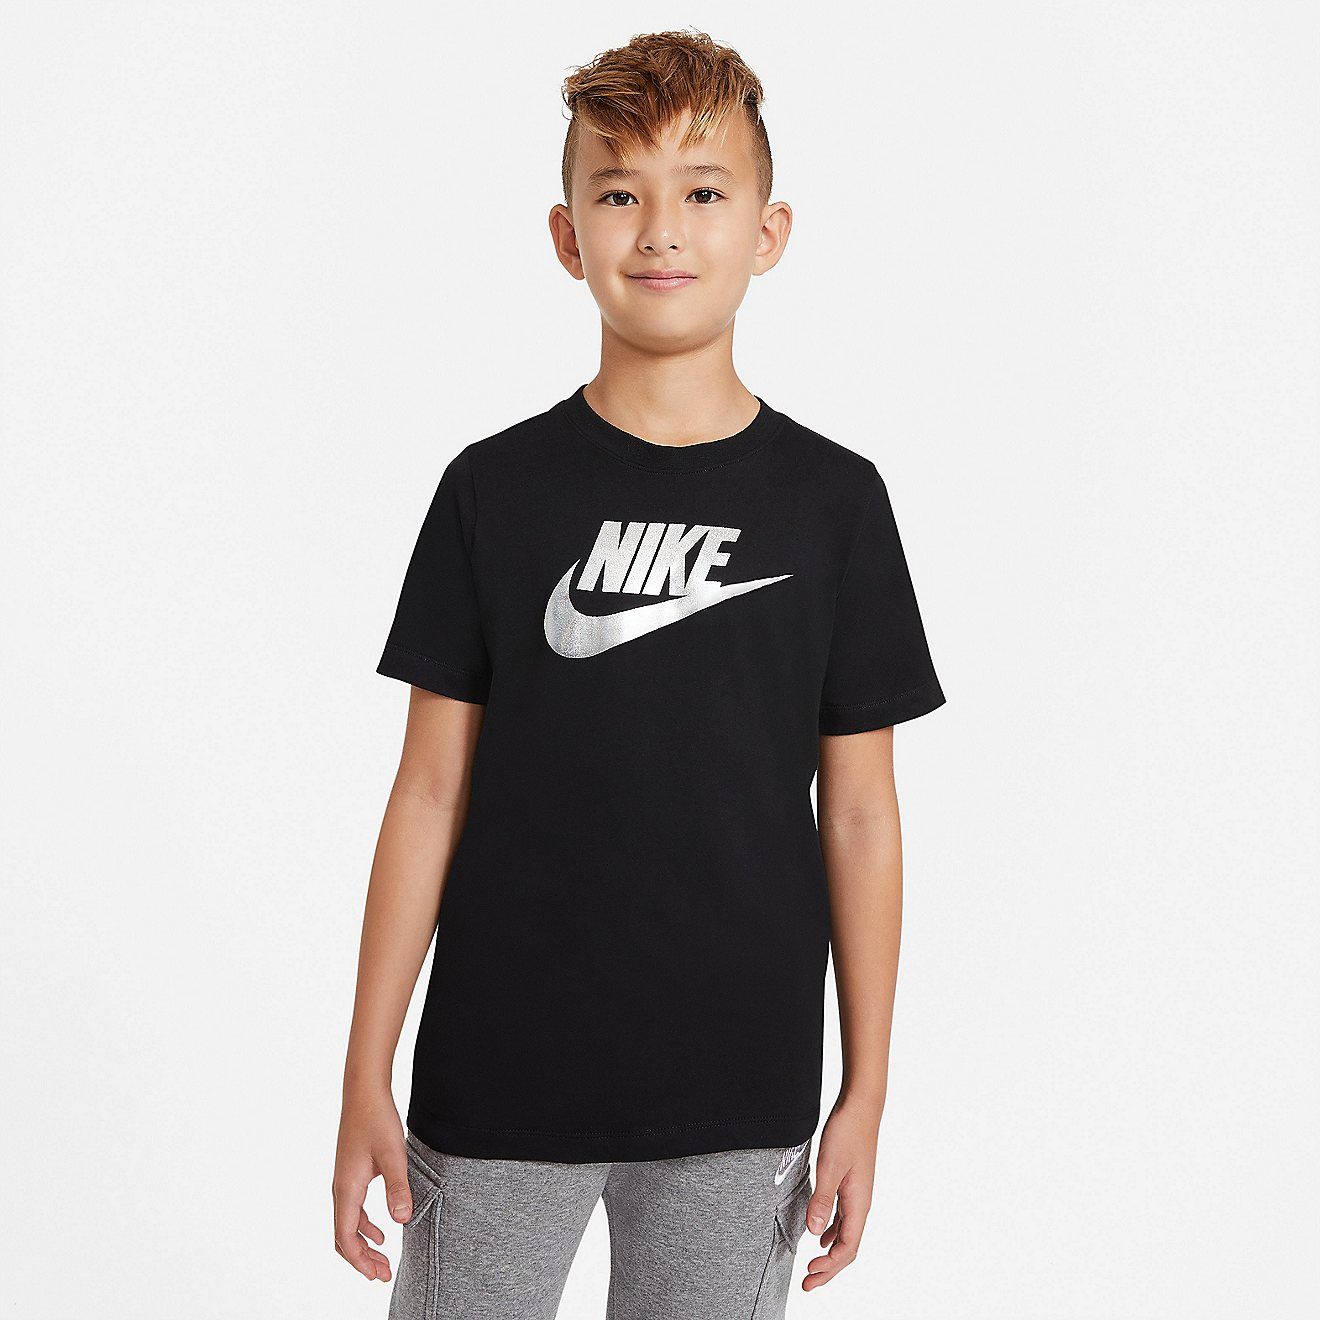 Nike™ Boys' Branded Foil T-shirt | Academy Sports + Outdoor Affiliate